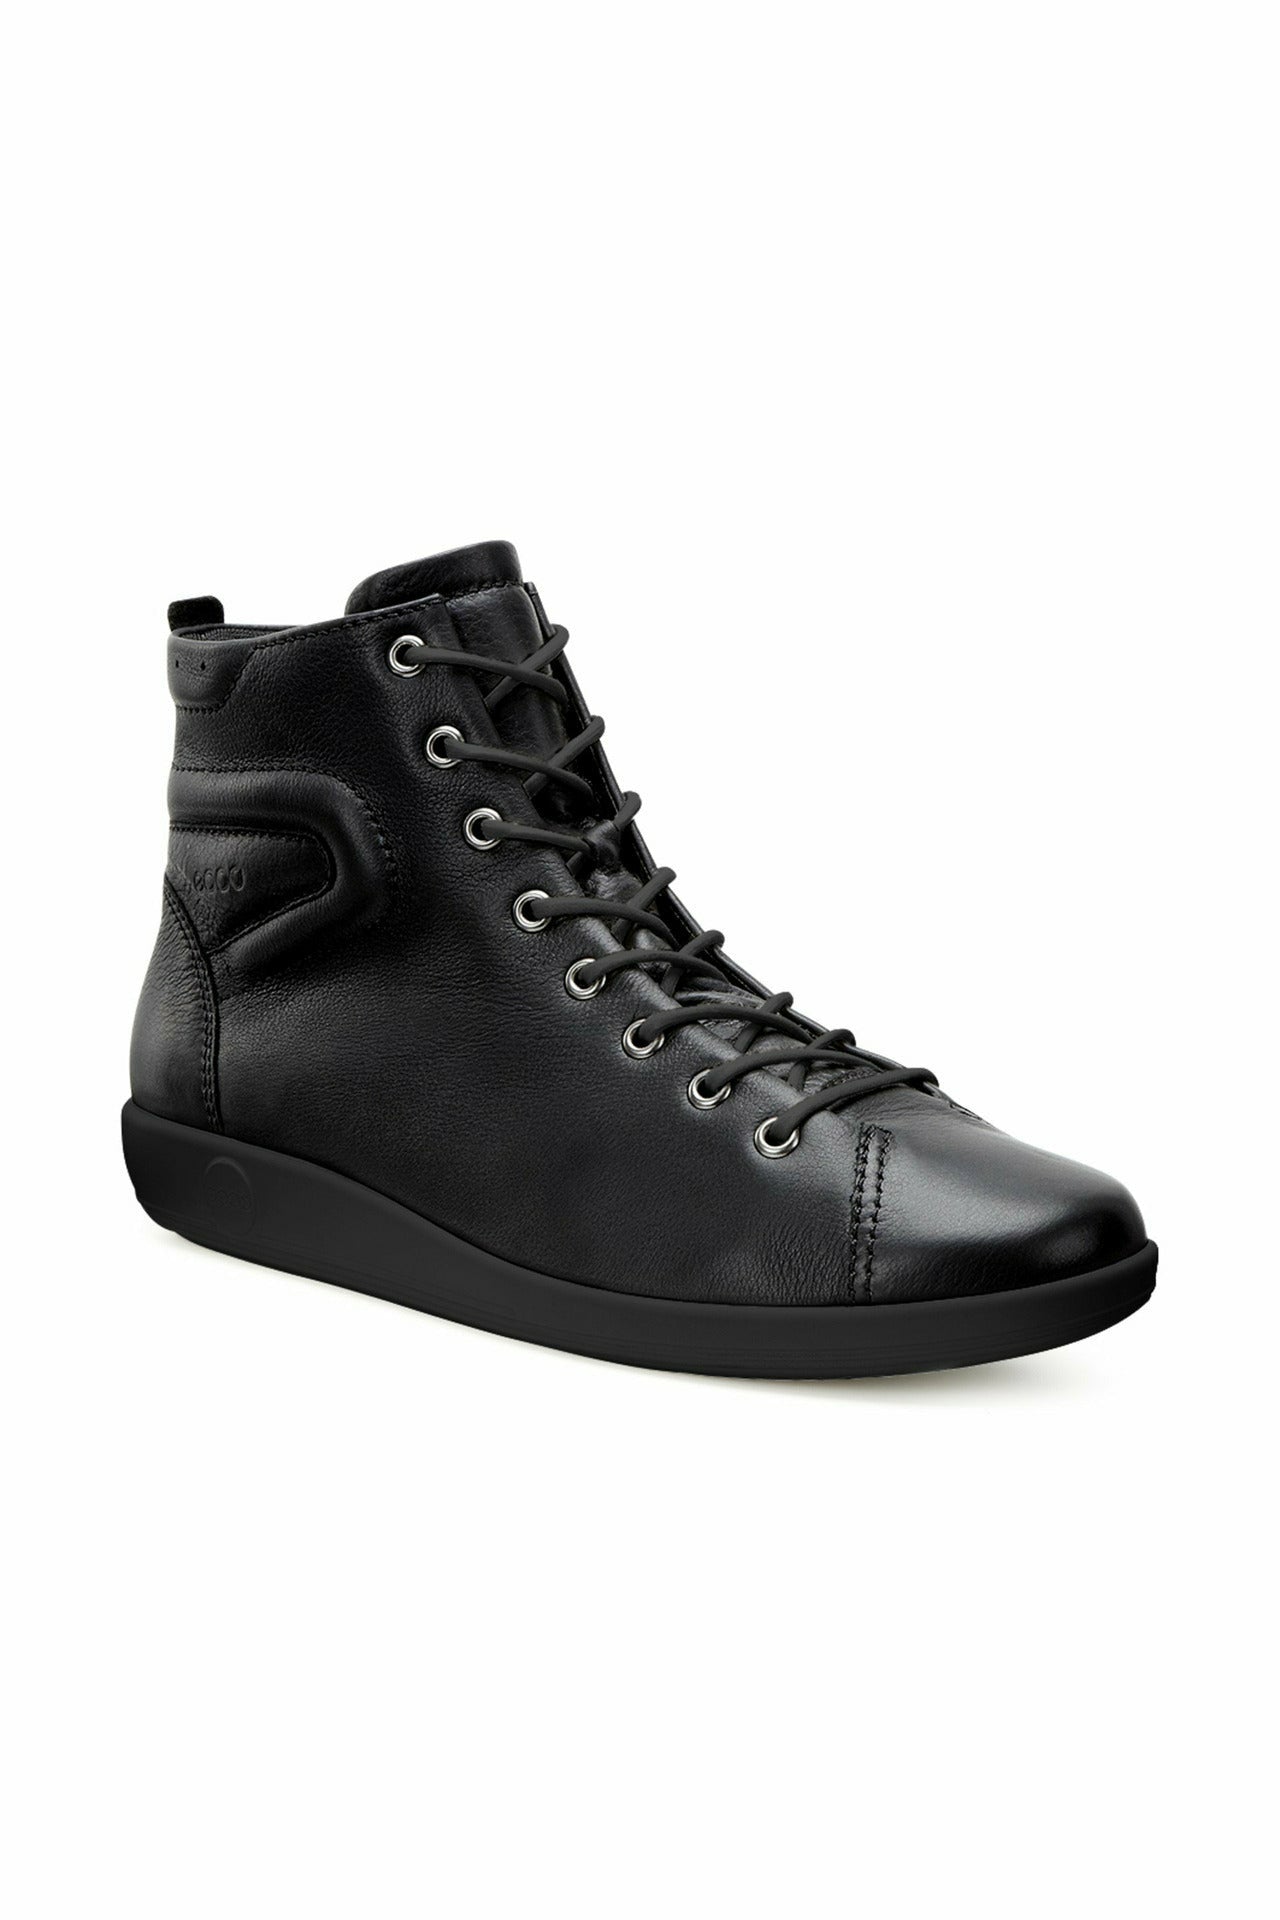 Ecco Womens Soft Boot 206523-56723 in black leather